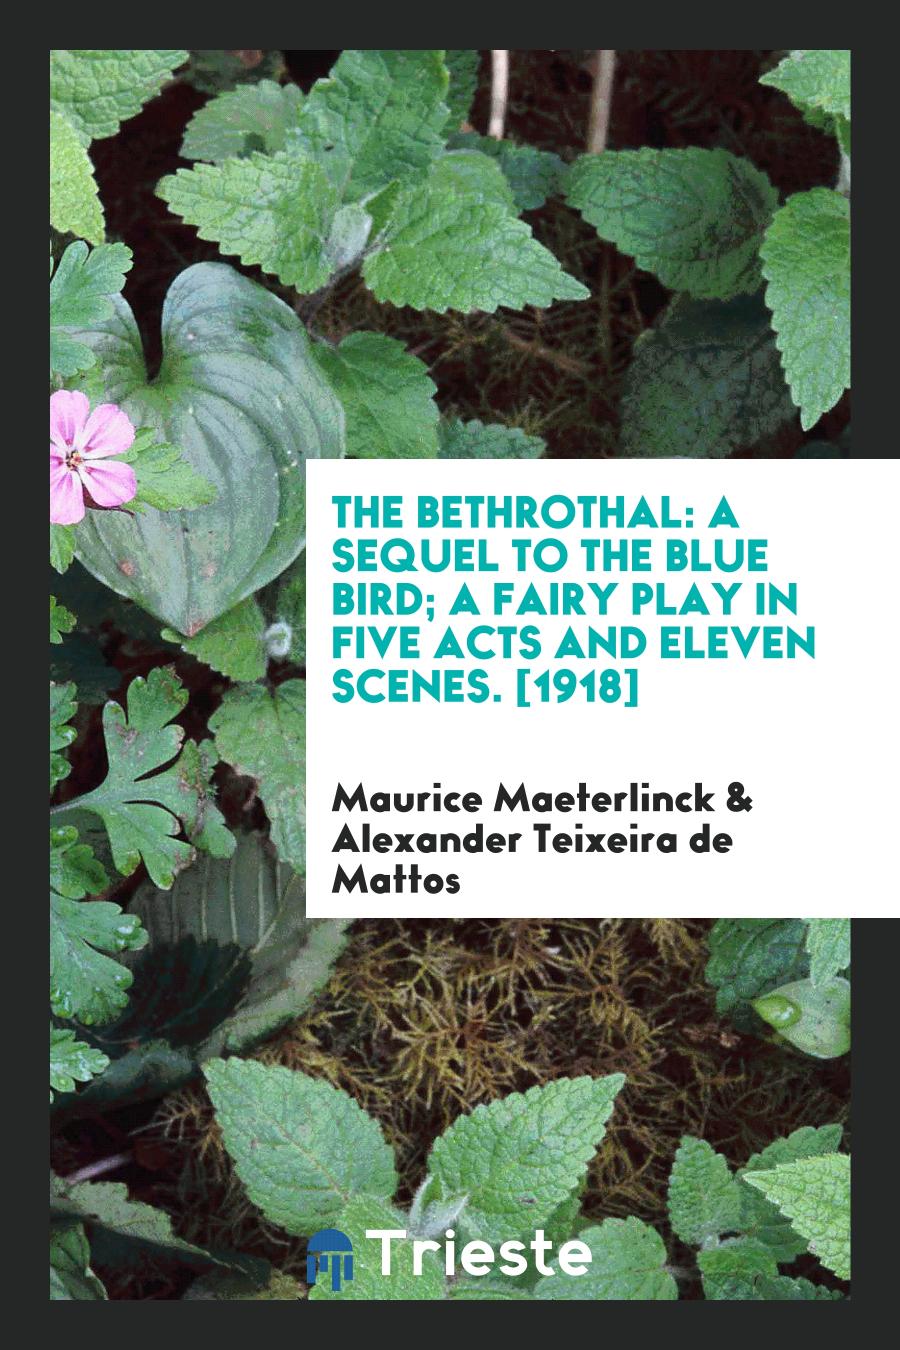 The Bethrothal: A Sequel to the Blue Bird; A Fairy Play in Five Acts and Eleven Scenes. [1918]